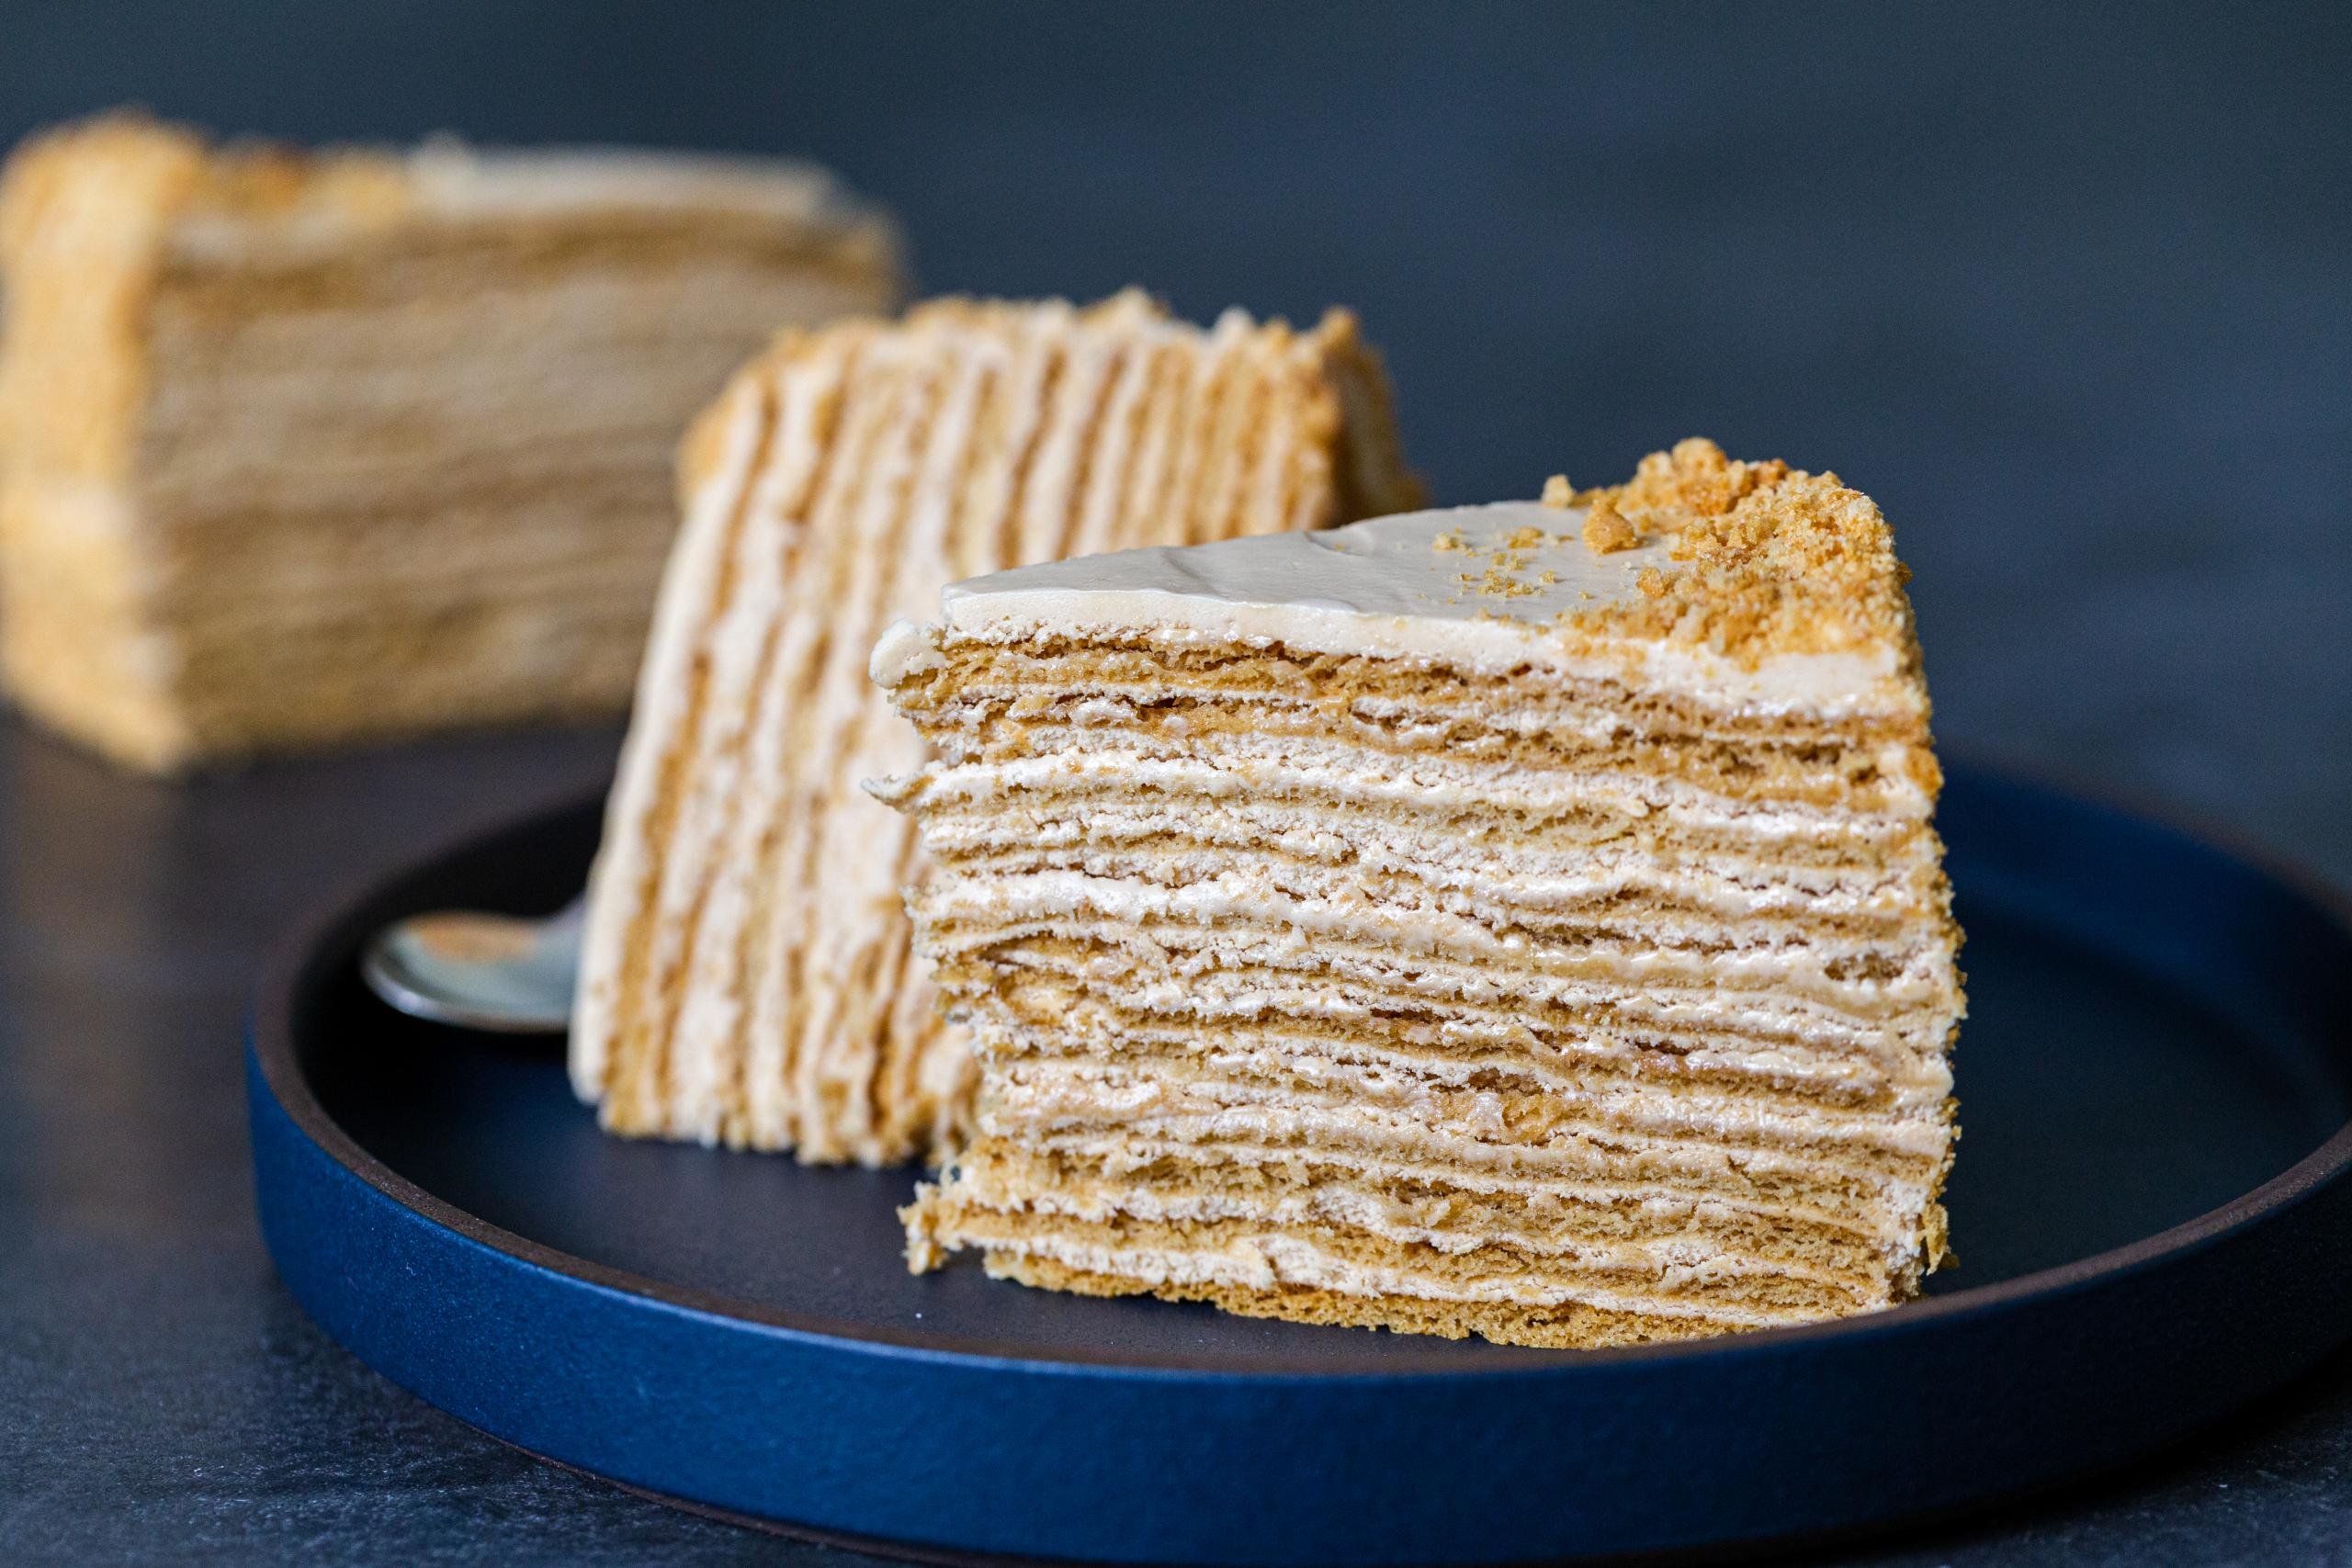 RUSSIAN HONEY CAKE – The Baking Table